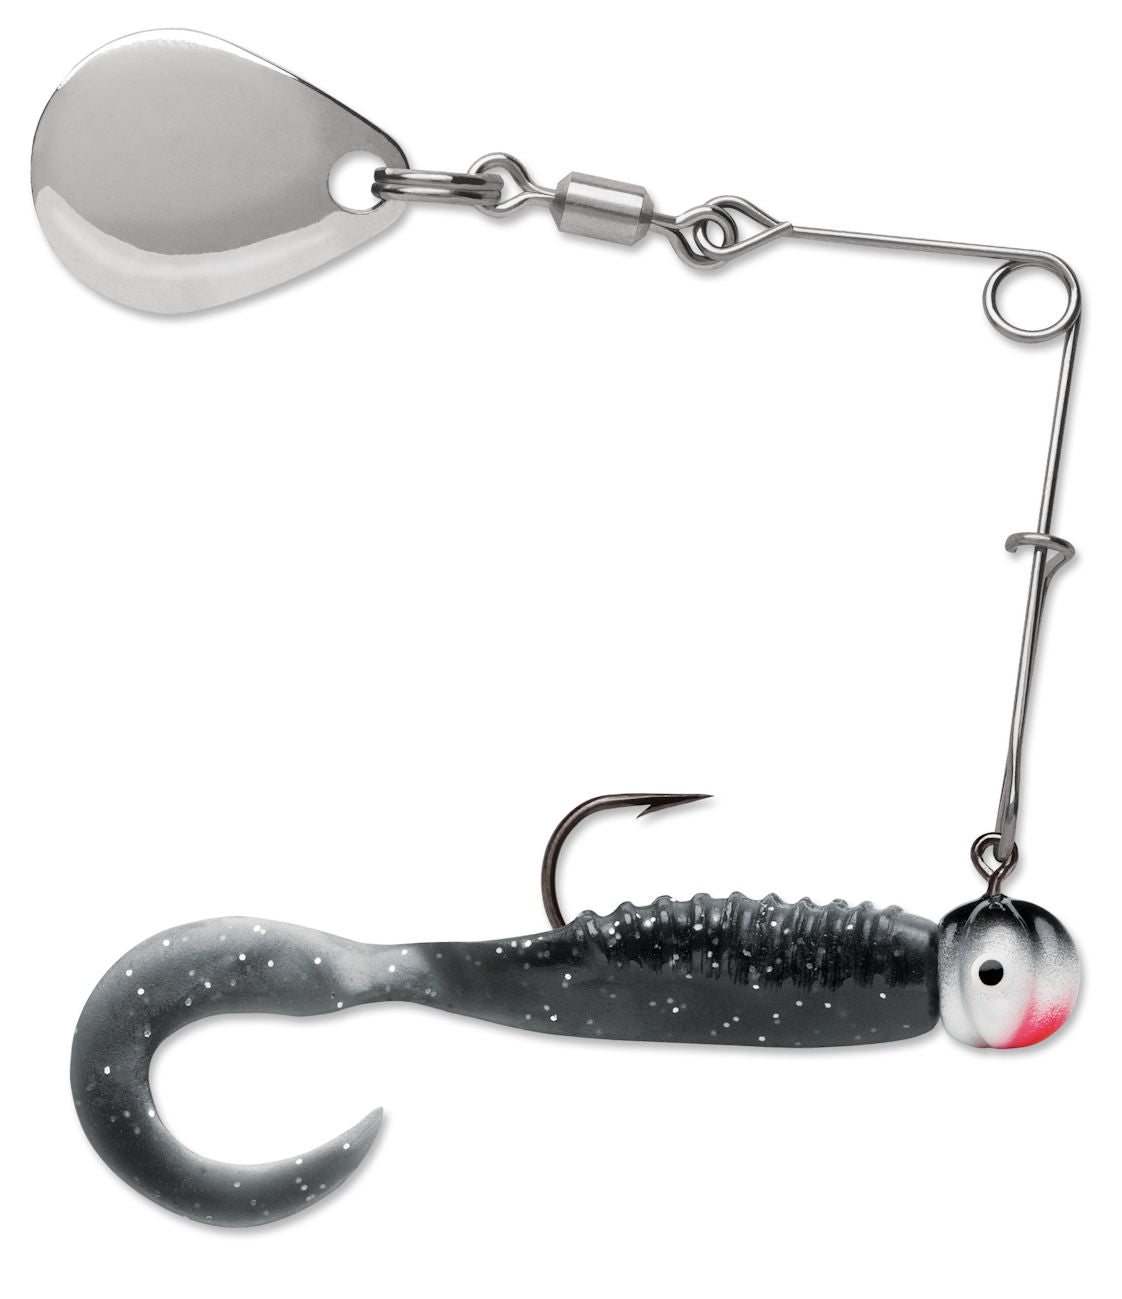 Curl Tail Spinnerbait_Crappie Minnow